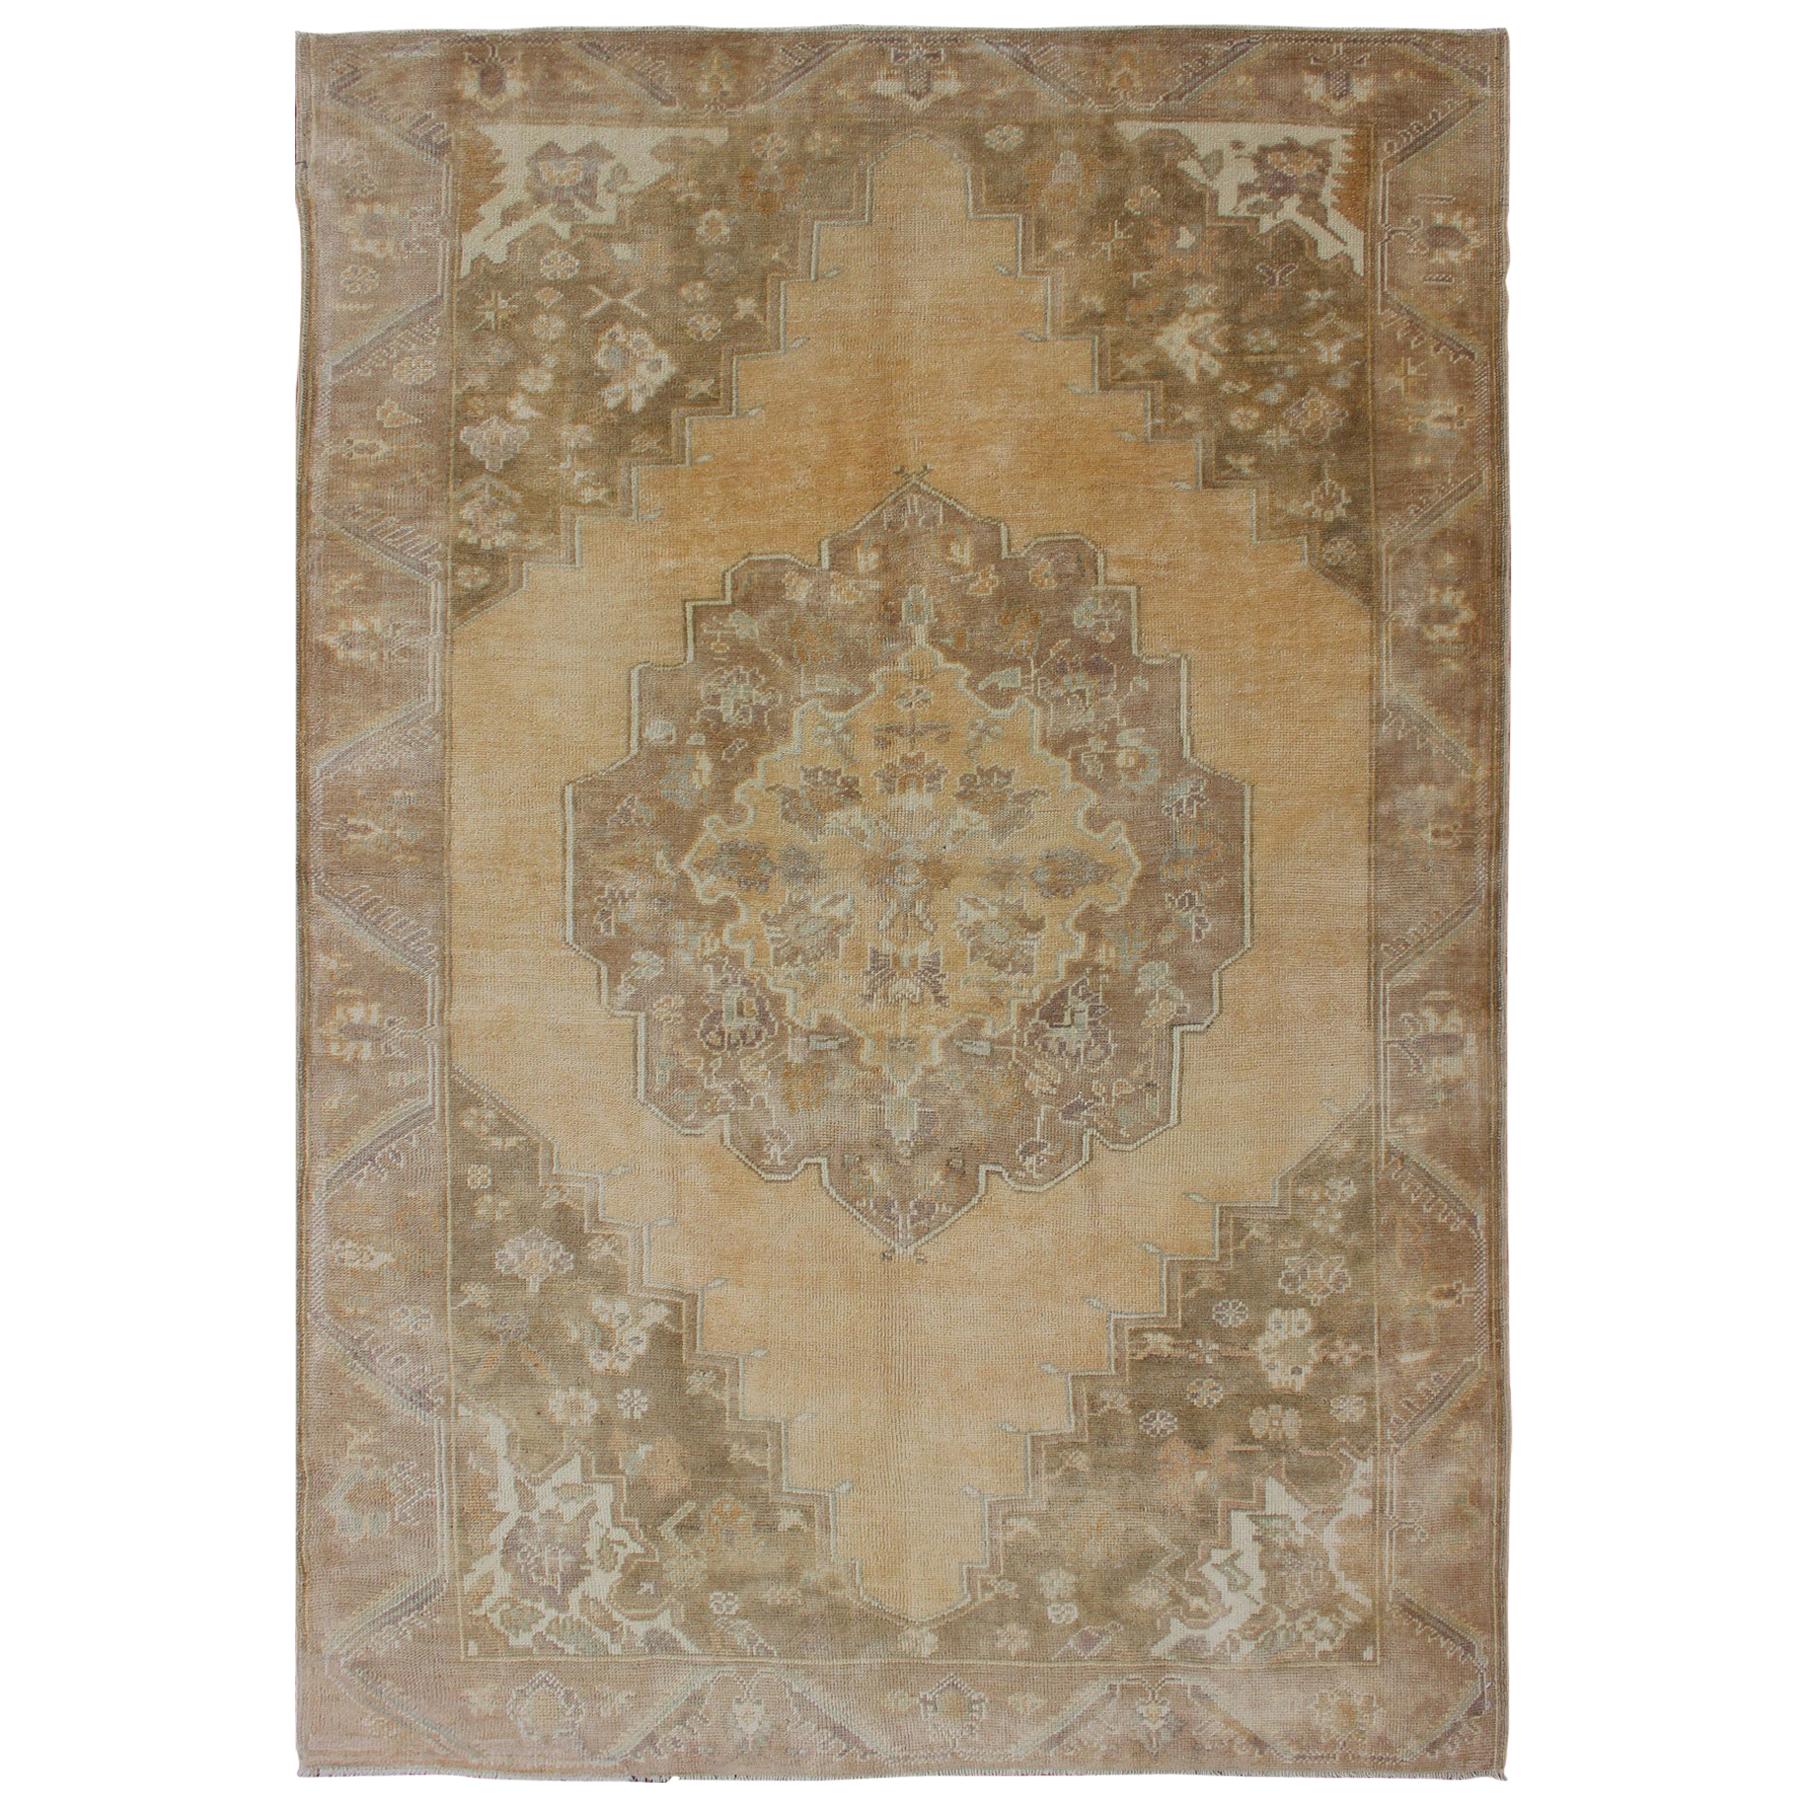 Butter, Yellow Green and Taupe Turkish Oushak Vintage Rug with Central Medallion